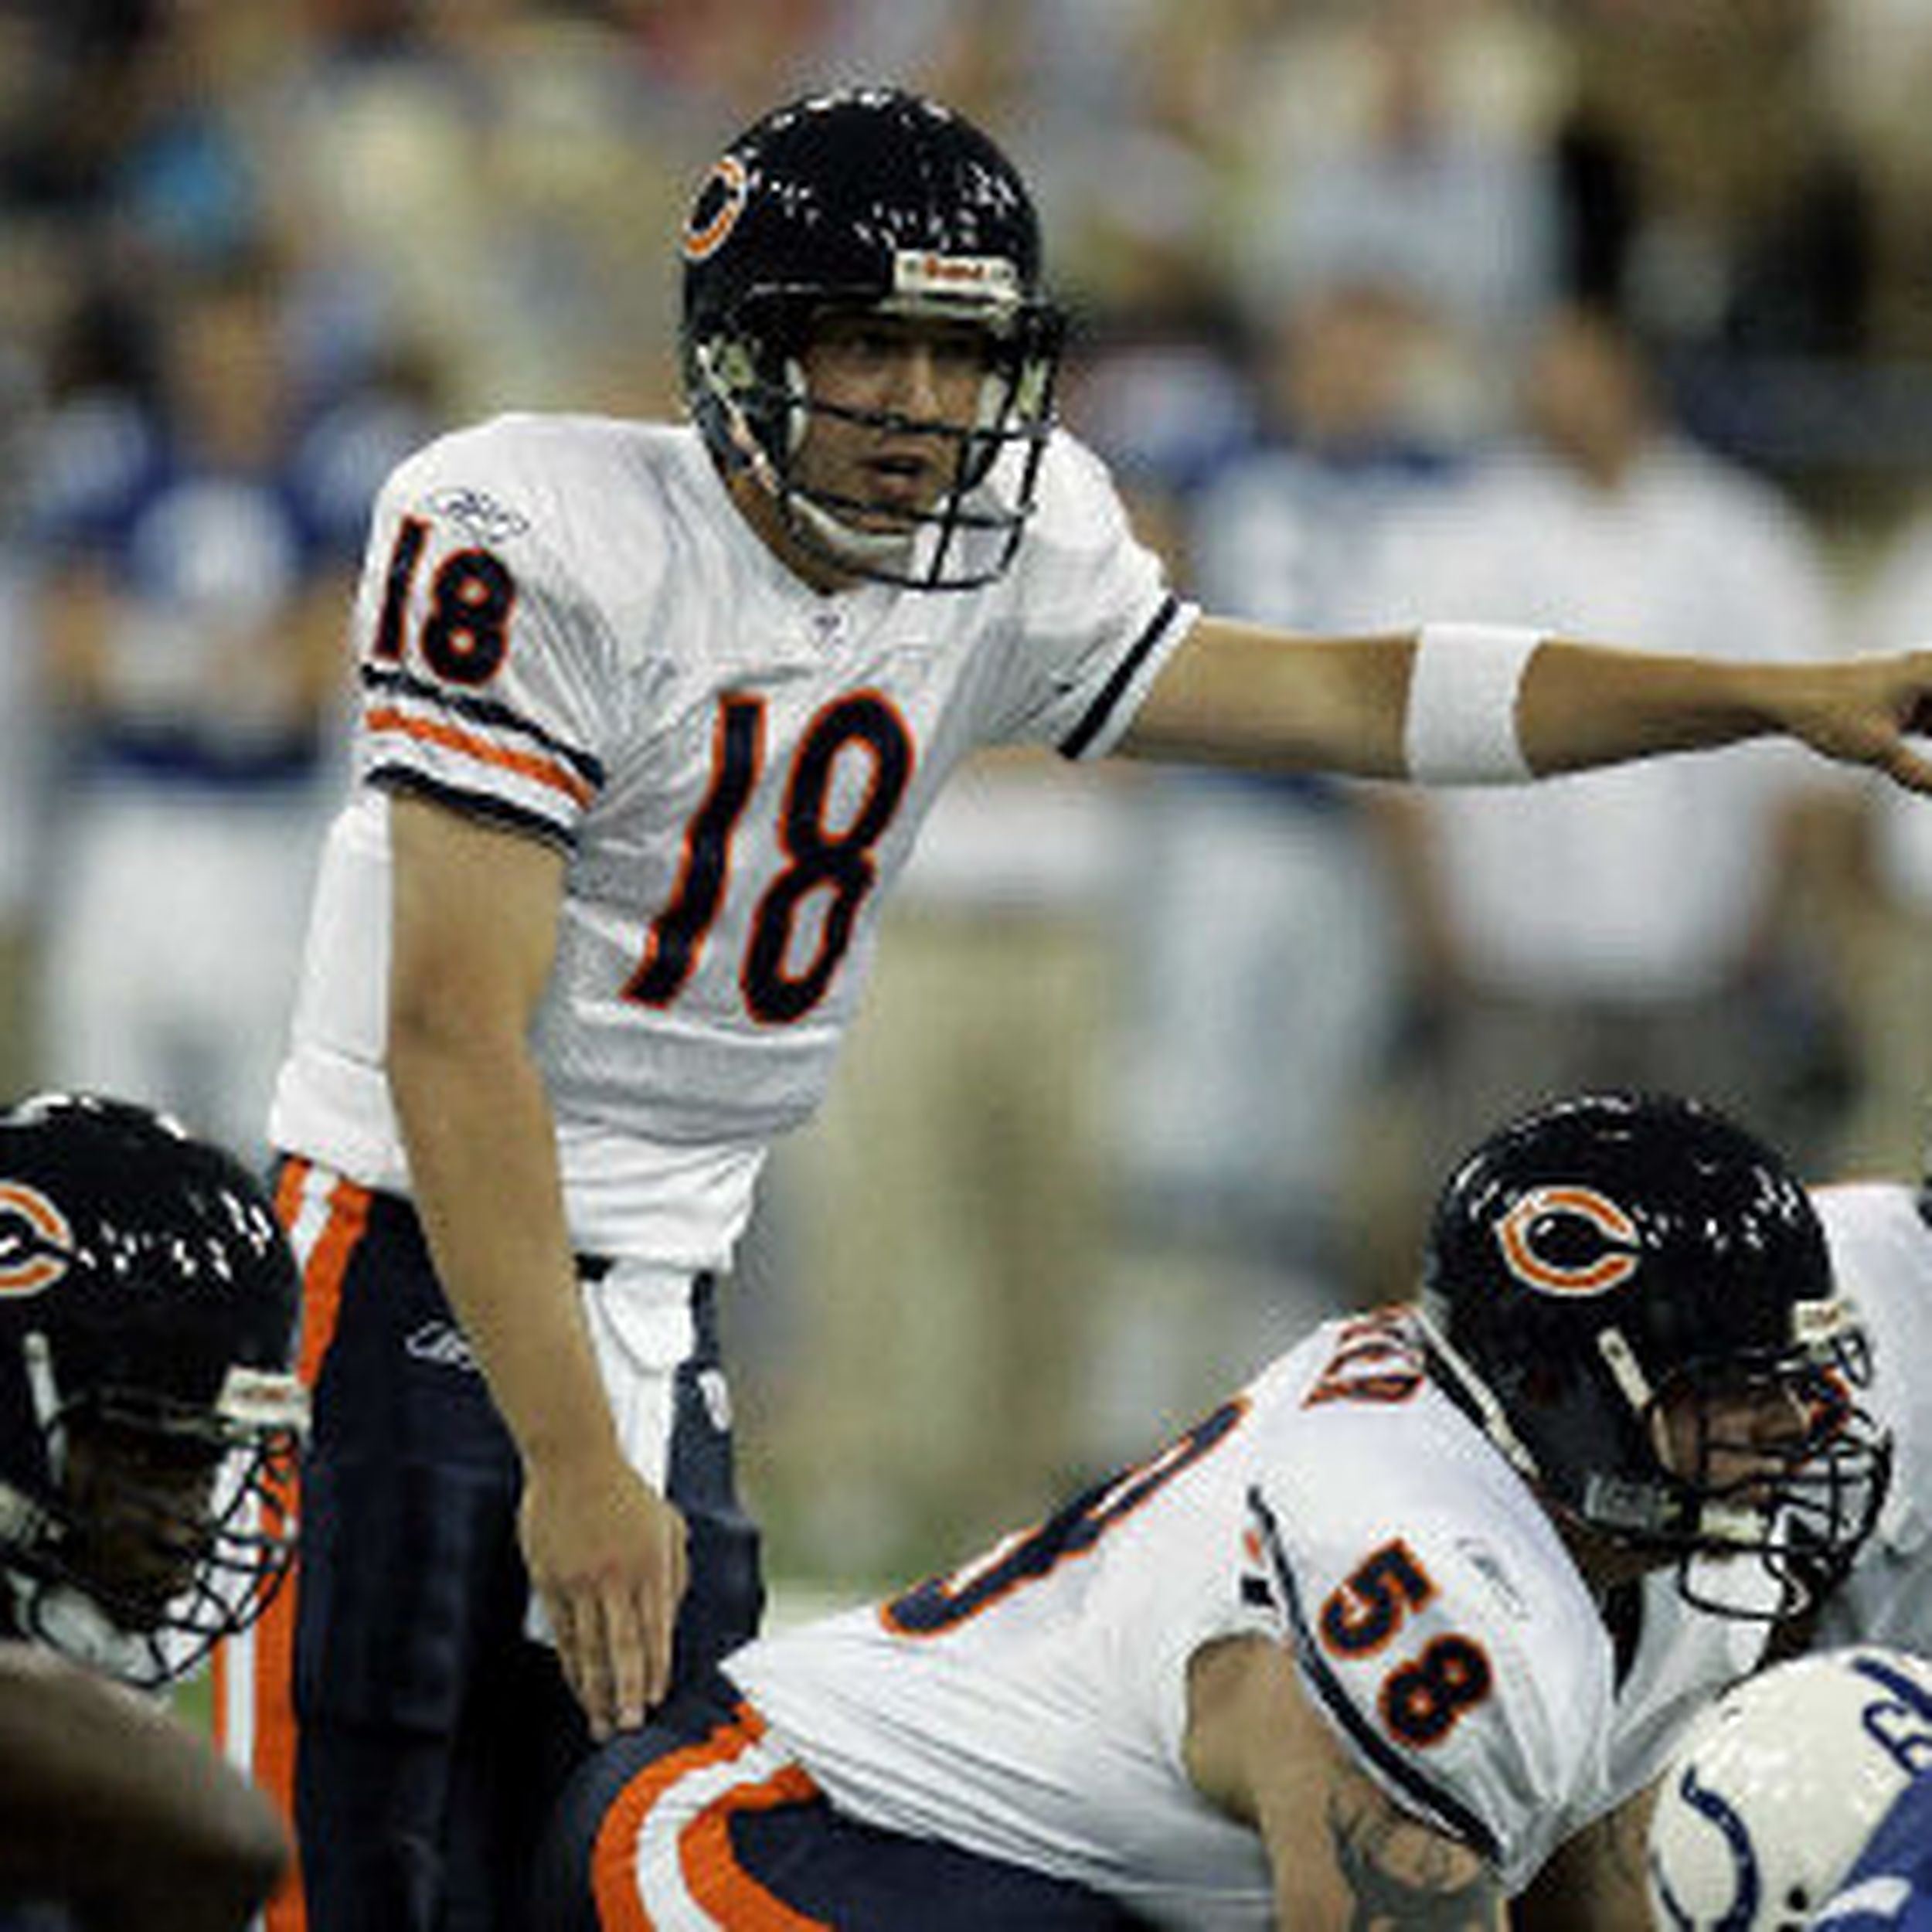 Orton gives stability to Bears